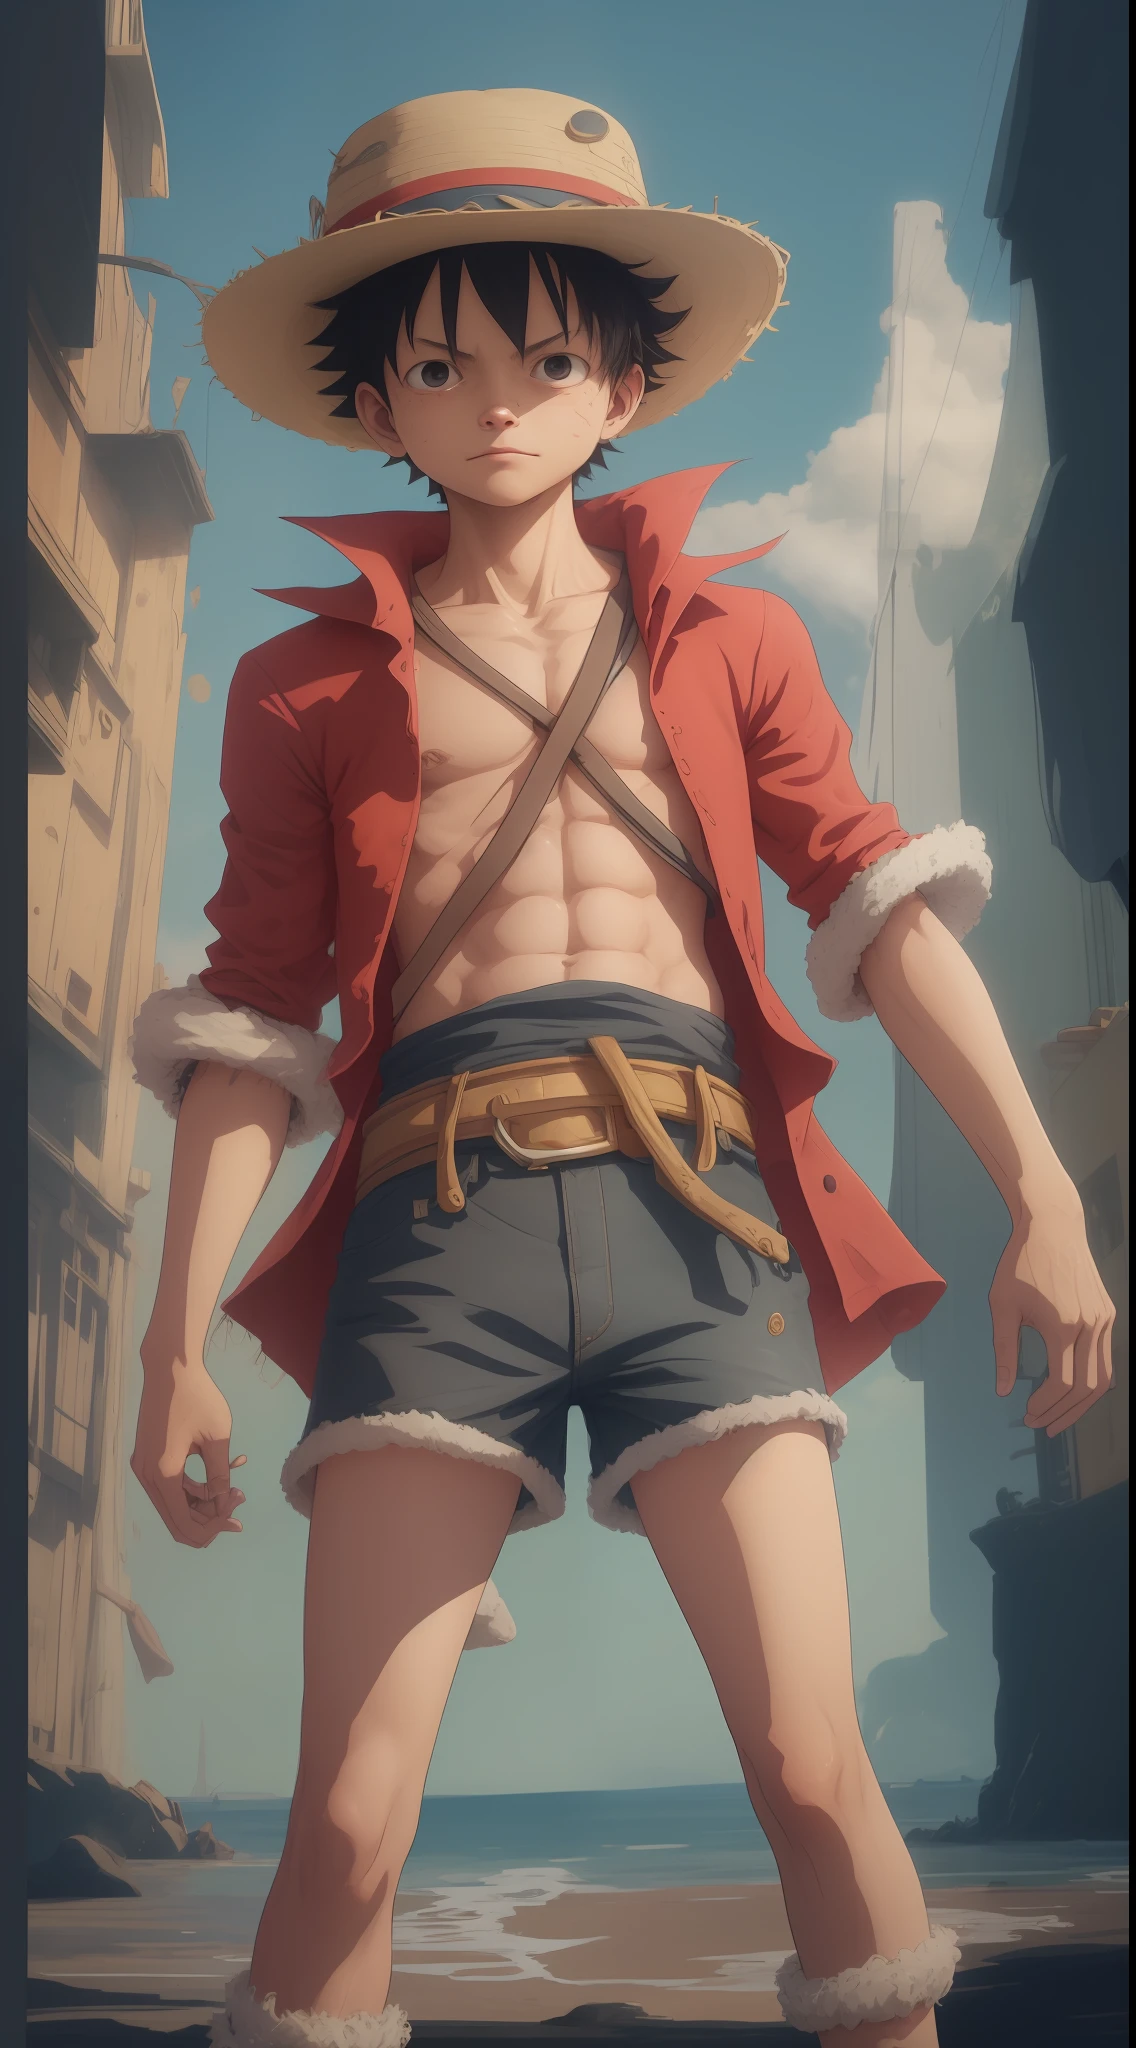 Luffy has black shaggy hair, round black eyes, and a slim muscular build. He is renowned for his trademark straw hat, which was lent to him when he was young by the legendary pirate captain, "Red-Haired" Shanks,[35] who in turn received it from Gol D. Roger.[43] Luffy wears an open, long-sleeved red cardigan with four buttons, with a yellow sash tied around his waist (somewhat reminiscent of Gol D. Roger's outfit). Luffy also has a (scar underneath his left eye), which he earned as a  by stabbing his face to show Shanks that he was tough enough to be a pirate.[44]